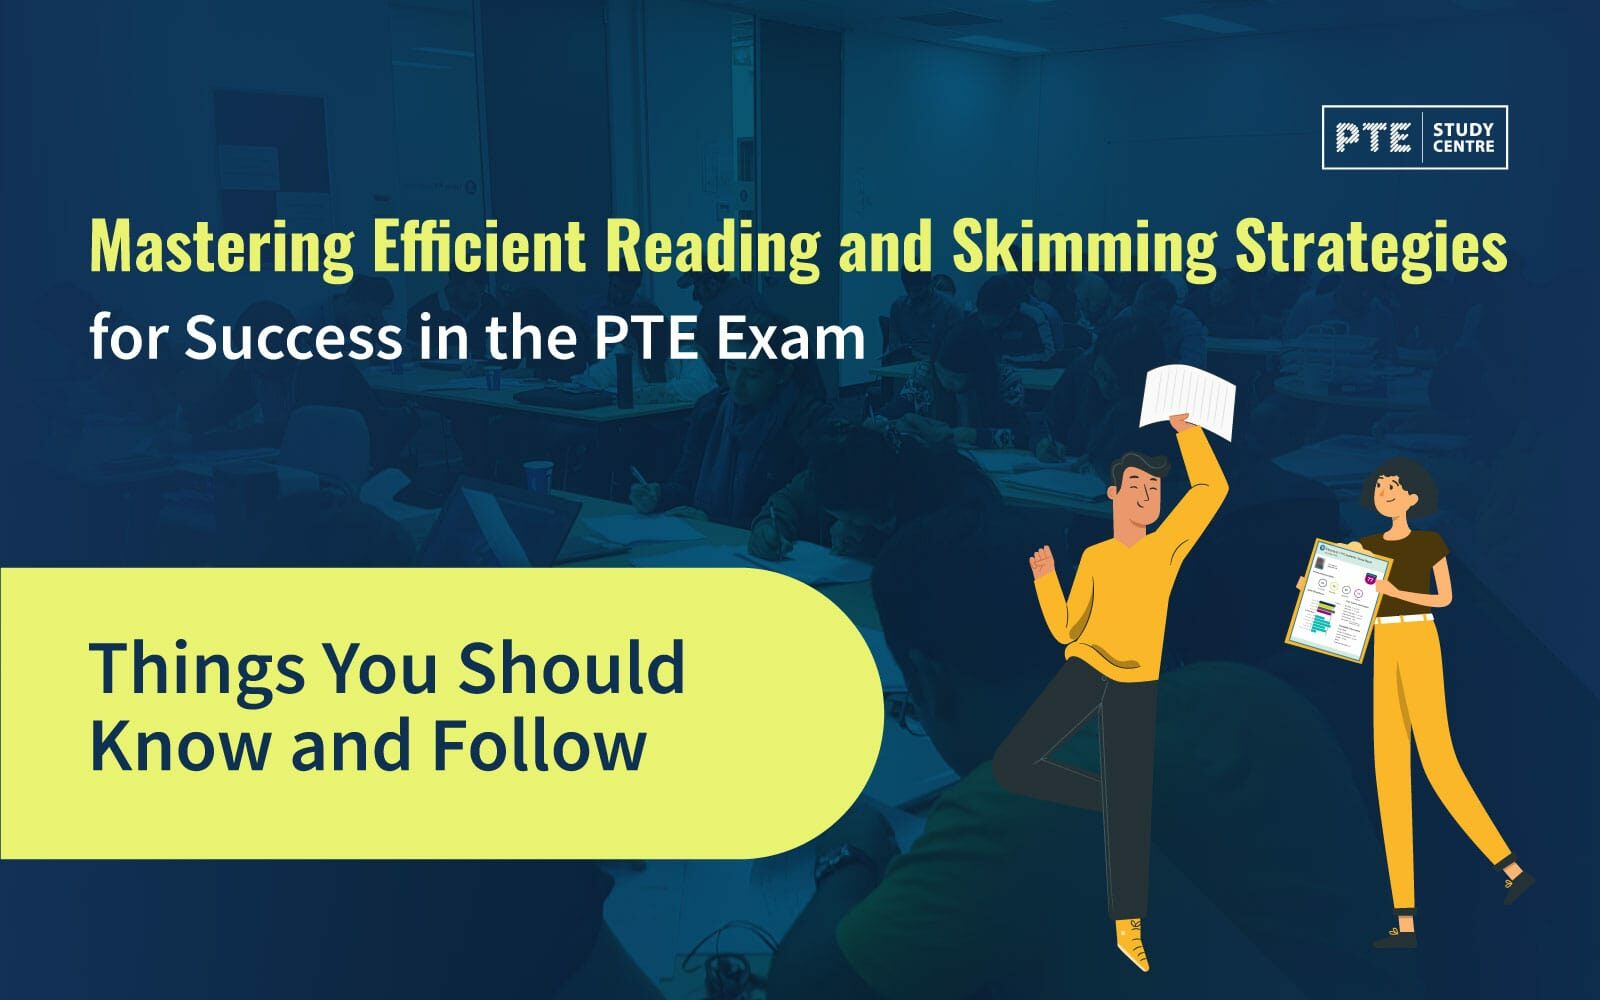 Mastering Efficient Reading and Skimming Strategies for Success in the PTE Exam